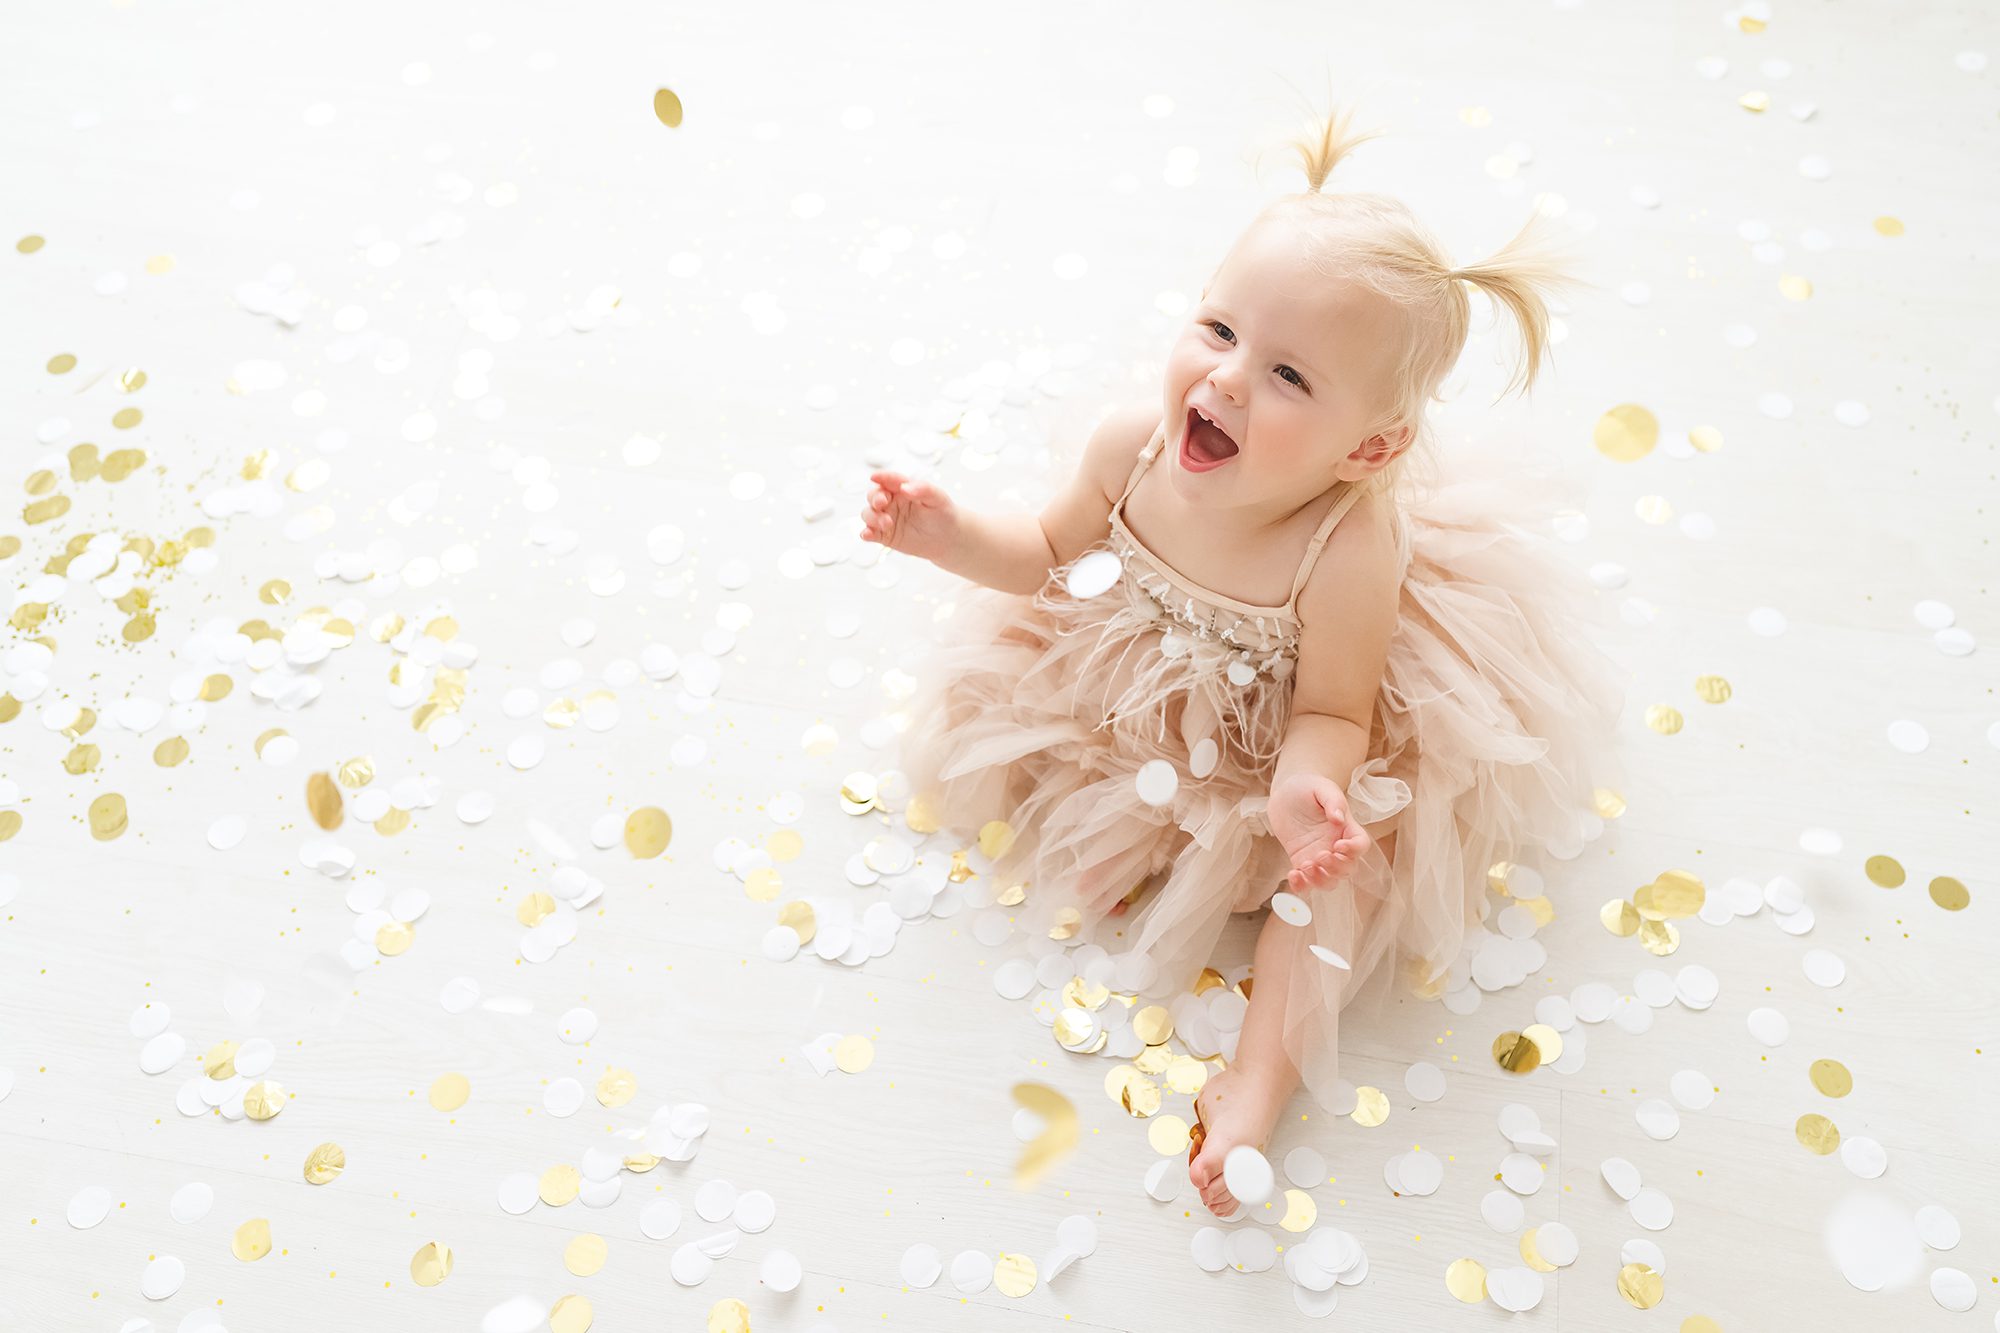 new years eve photoshoot ideas kids baby girl in blush pink dress with gold confetti